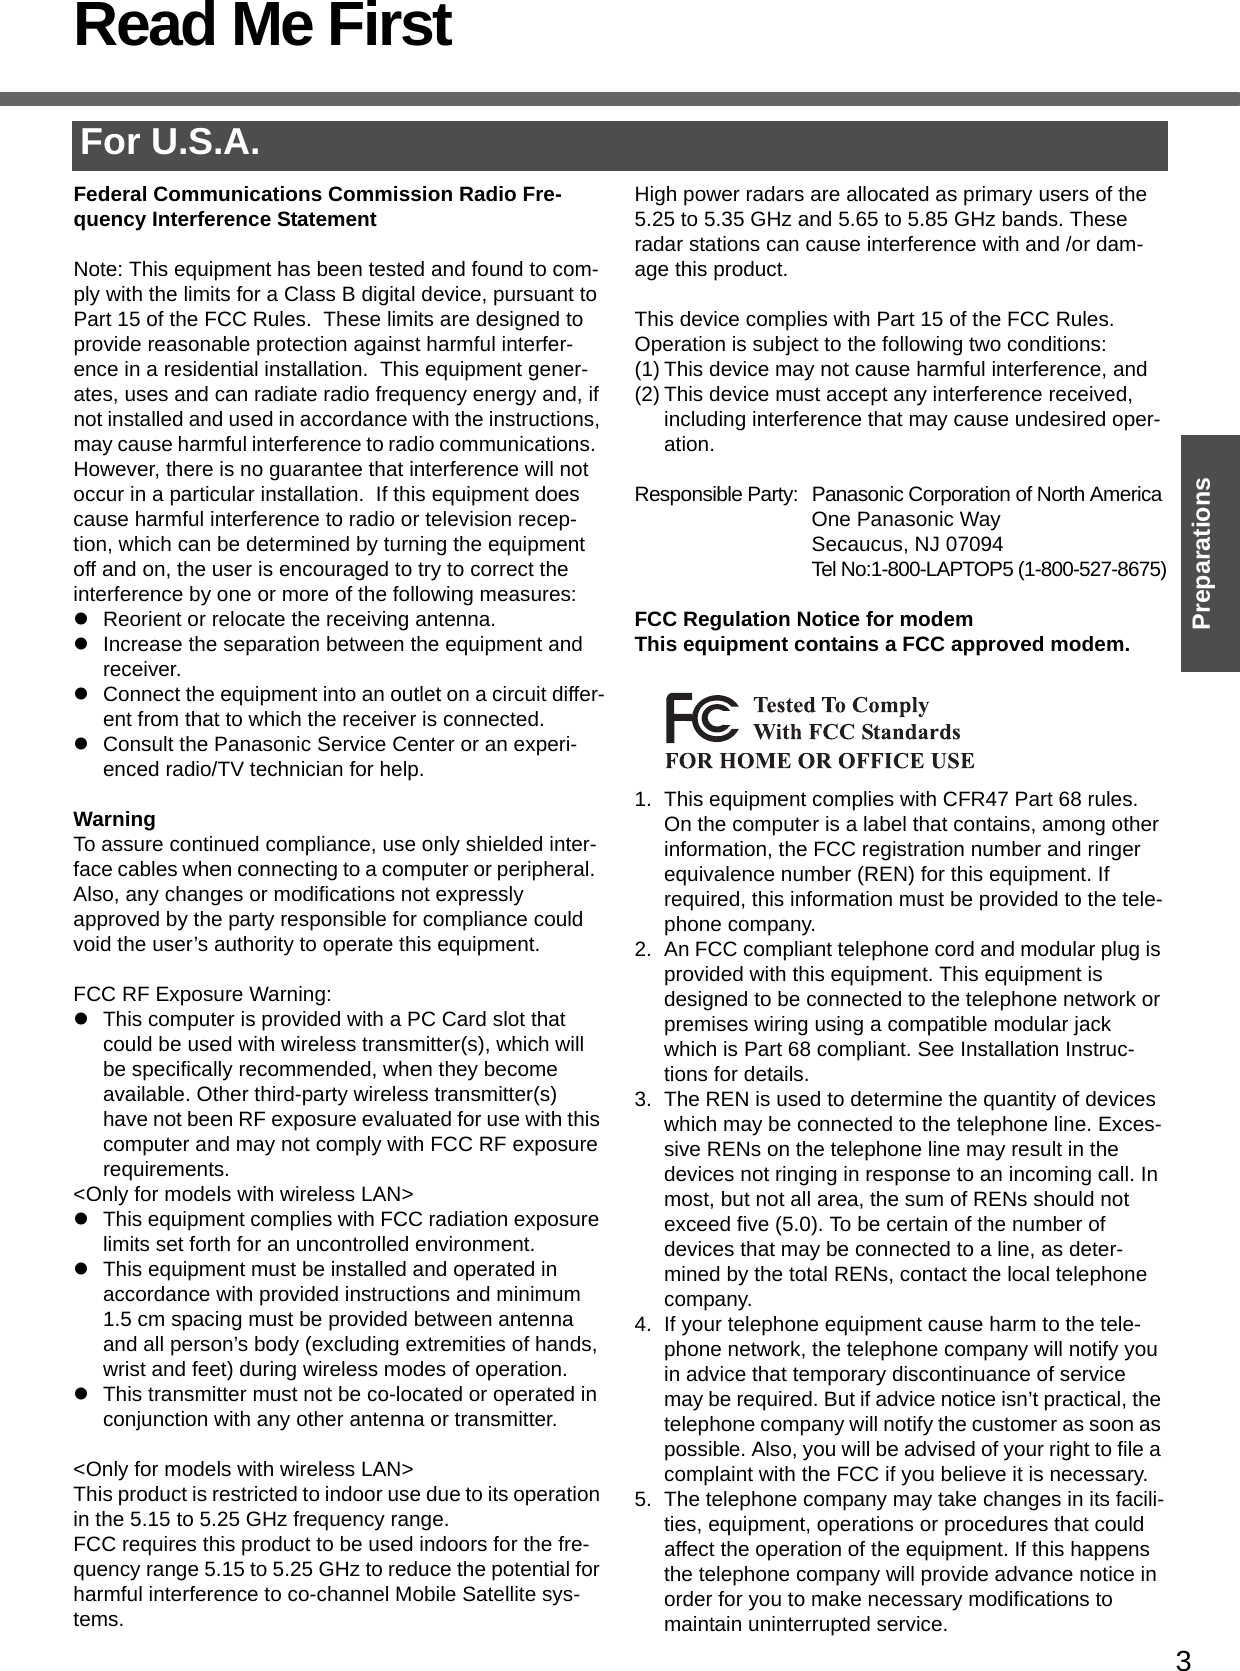 3PreparationsRead Me FirstFor U.S.A.Federal Communications Commission Radio Fre-quency Interference StatementNote: This equipment has been tested and found to com-ply with the limits for a Class B digital device, pursuant to Part 15 of the FCC Rules.  These limits are designed to provide reasonable protection against harmful interfer-ence in a residential installation.  This equipment gener-ates, uses and can radiate radio frequency energy and, if not installed and used in accordance with the instructions, may cause harmful interference to radio communications.  However, there is no guarantee that interference will not occur in a particular installation.  If this equipment does cause harmful interference to radio or television recep-tion, which can be determined by turning the equipment off and on, the user is encouraged to try to correct the interference by one or more of the following measures:zReorient or relocate the receiving antenna.zIncrease the separation between the equipment and receiver.zConnect the equipment into an outlet on a circuit differ-ent from that to which the receiver is connected.zConsult the Panasonic Service Center or an experi-enced radio/TV technician for help.WarningTo assure continued compliance, use only shielded inter-face cables when connecting to a computer or peripheral.  Also, any changes or modifications not expressly approved by the party responsible for compliance could void the user’s authority to operate this equipment.FCC RF Exposure Warning:zThis computer is provided with a PC Card slot that could be used with wireless transmitter(s), which will be specifically recommended, when they become available. Other third-party wireless transmitter(s) have not been RF exposure evaluated for use with this computer and may not comply with FCC RF exposure requirements.&lt;Only for models with wireless LAN&gt;zThis equipment complies with FCC radiation exposure limits set forth for an uncontrolled environment.zThis equipment must be installed and operated in accordance with provided instructions and minimum 1.5 cm spacing must be provided between antenna and all person’s body (excluding extremities of hands, wrist and feet) during wireless modes of operation.zThis transmitter must not be co-located or operated in conjunction with any other antenna or transmitter.&lt;Only for models with wireless LAN&gt;This product is restricted to indoor use due to its operation in the 5.15 to 5.25 GHz frequency range.FCC requires this product to be used indoors for the fre-quency range 5.15 to 5.25 GHz to reduce the potential for harmful interference to co-channel Mobile Satellite sys-tems.High power radars are allocated as primary users of the 5.25 to 5.35 GHz and 5.65 to 5.85 GHz bands. These radar stations can cause interference with and /or dam-age this product.This device complies with Part 15 of the FCC Rules.  Operation is subject to the following two conditions:(1) This device may not cause harmful interference, and(2) This device must accept any interference received, including interference that may cause undesired oper-ation.Responsible Party: Panasonic Corporation of North AmericaOne Panasonic WaySecaucus, NJ 07094Tel No:1-800-LAPTOP5 (1-800-527-8675)FCC Regulation Notice for modemThis equipment contains a FCC approved modem.1. This equipment complies with CFR47 Part 68 rules. On the computer is a label that contains, among other information, the FCC registration number and ringer equivalence number (REN) for this equipment. If required, this information must be provided to the tele-phone company.2. An FCC compliant telephone cord and modular plug is provided with this equipment. This equipment is designed to be connected to the telephone network or premises wiring using a compatible modular jack which is Part 68 compliant. See Installation Instruc-tions for details.3. The REN is used to determine the quantity of devices which may be connected to the telephone line. Exces-sive RENs on the telephone line may result in the devices not ringing in response to an incoming call. In most, but not all area, the sum of RENs should not exceed five (5.0). To be certain of the number of devices that may be connected to a line, as deter-mined by the total RENs, contact the local telephone company.4. If your telephone equipment cause harm to the tele-phone network, the telephone company will notify you in advice that temporary discontinuance of service may be required. But if advice notice isn’t practical, the telephone company will notify the customer as soon as possible. Also, you will be advised of your right to file a complaint with the FCC if you believe it is necessary.5. The telephone company may take changes in its facili-ties, equipment, operations or procedures that could affect the operation of the equipment. If this happens the telephone company will provide advance notice in order for you to make necessary modifications to maintain uninterrupted service. 